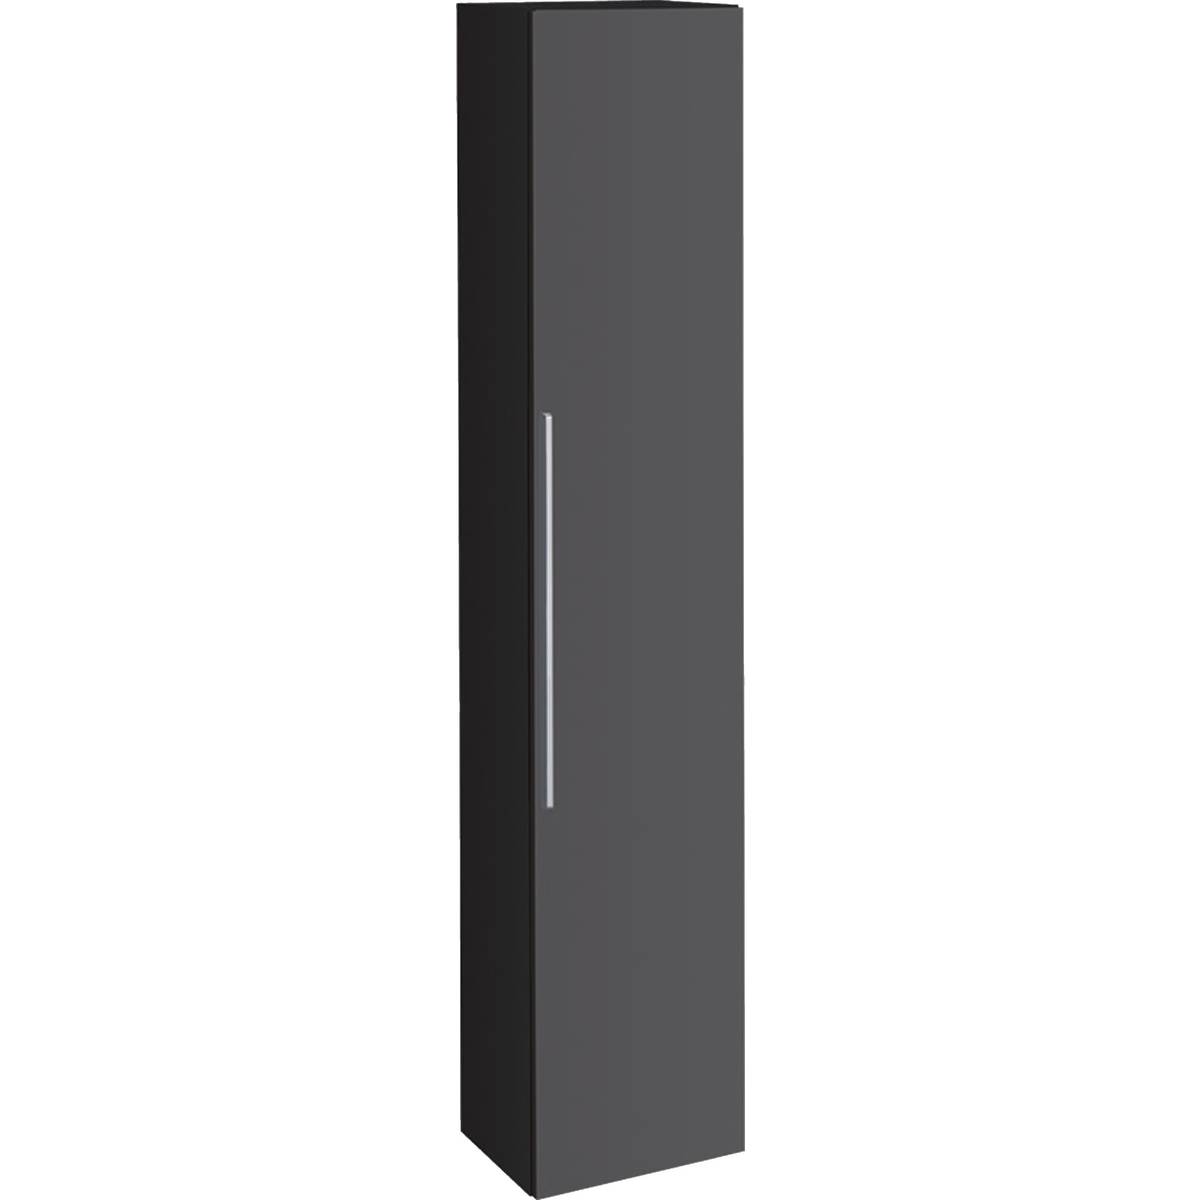 iCon tall cabinet with one door